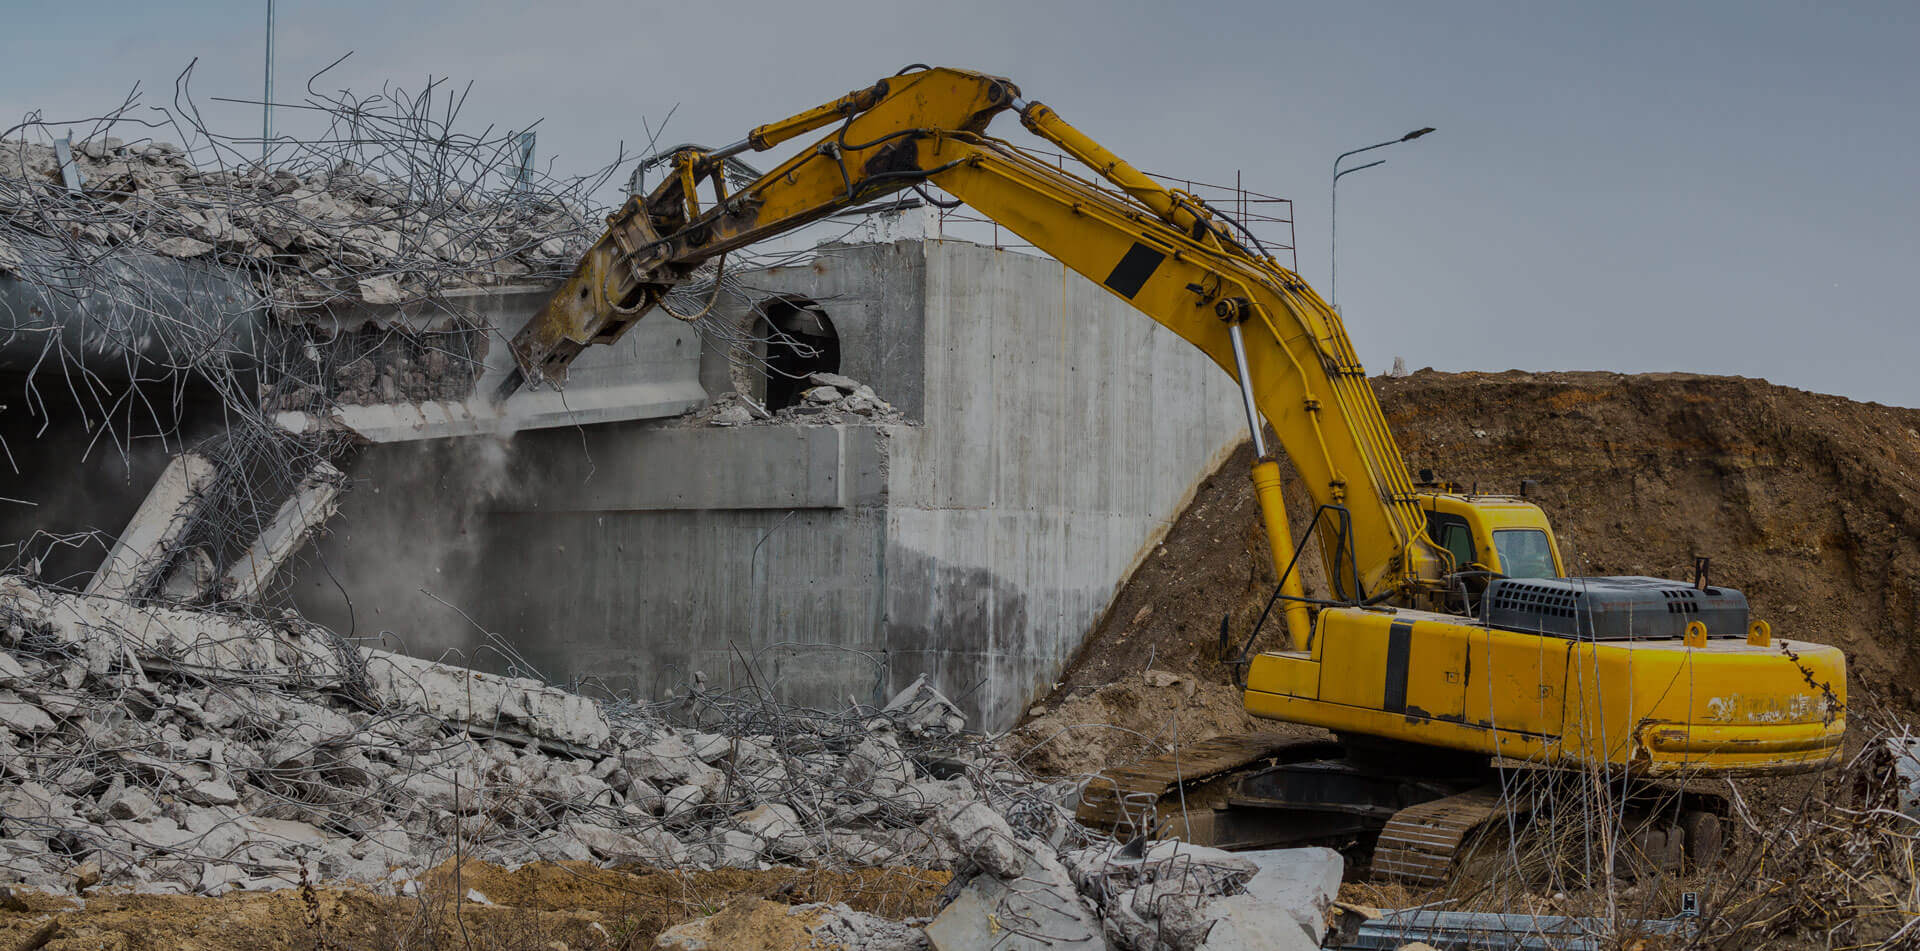 Professional demolition of reinforced concrete structures using industrial hydraulic hammer.